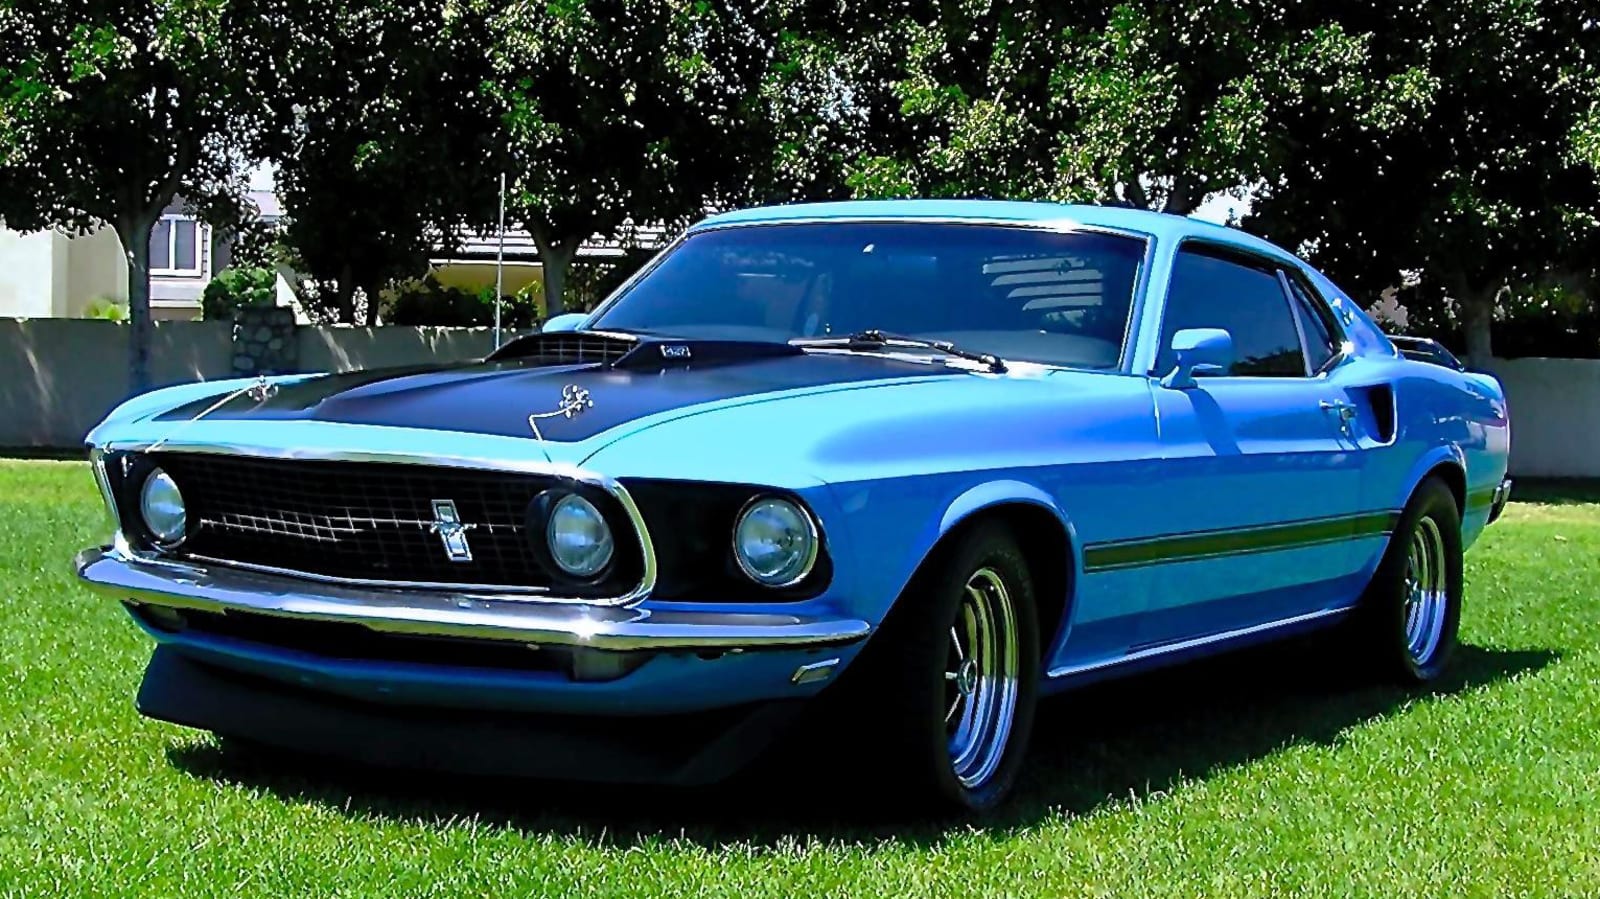 1969 Ford Mustang Mach 1 Fastback at Anaheim 2015 as F272 - Mecum Auctions